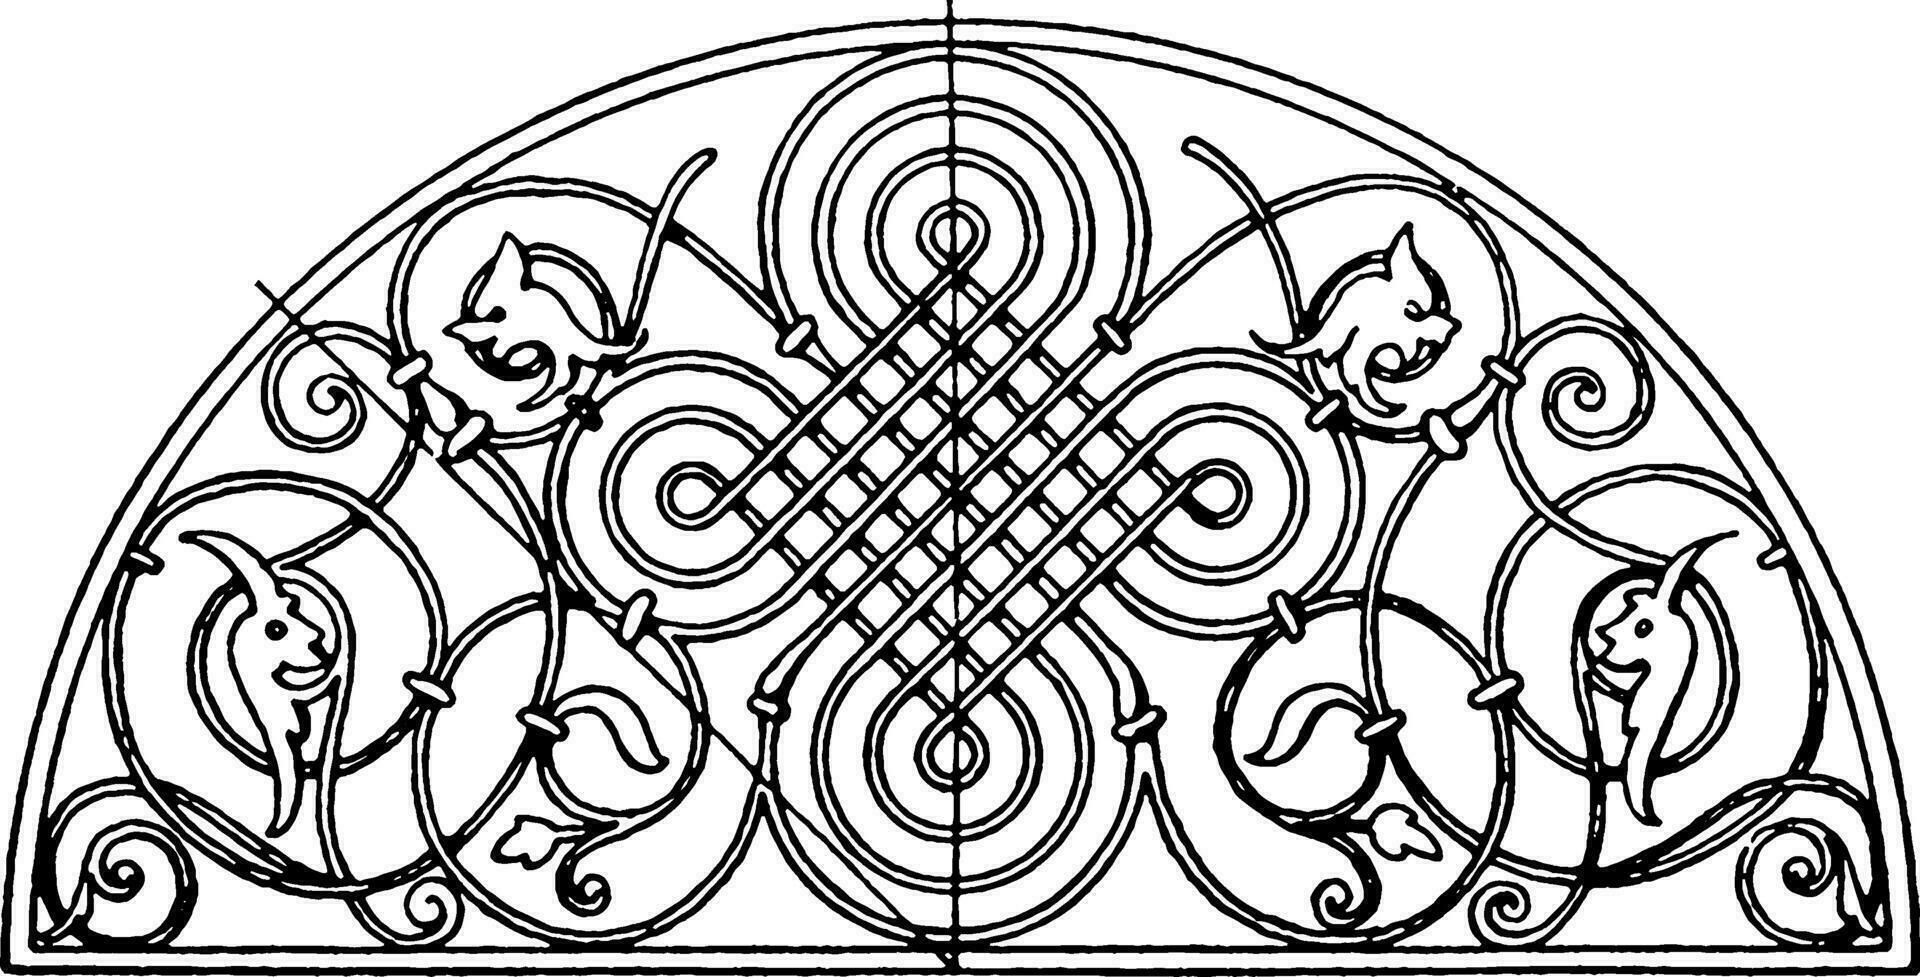 Renaissance Lunette Panel is a German design made out of wrought-iron, vintage engraving. vector